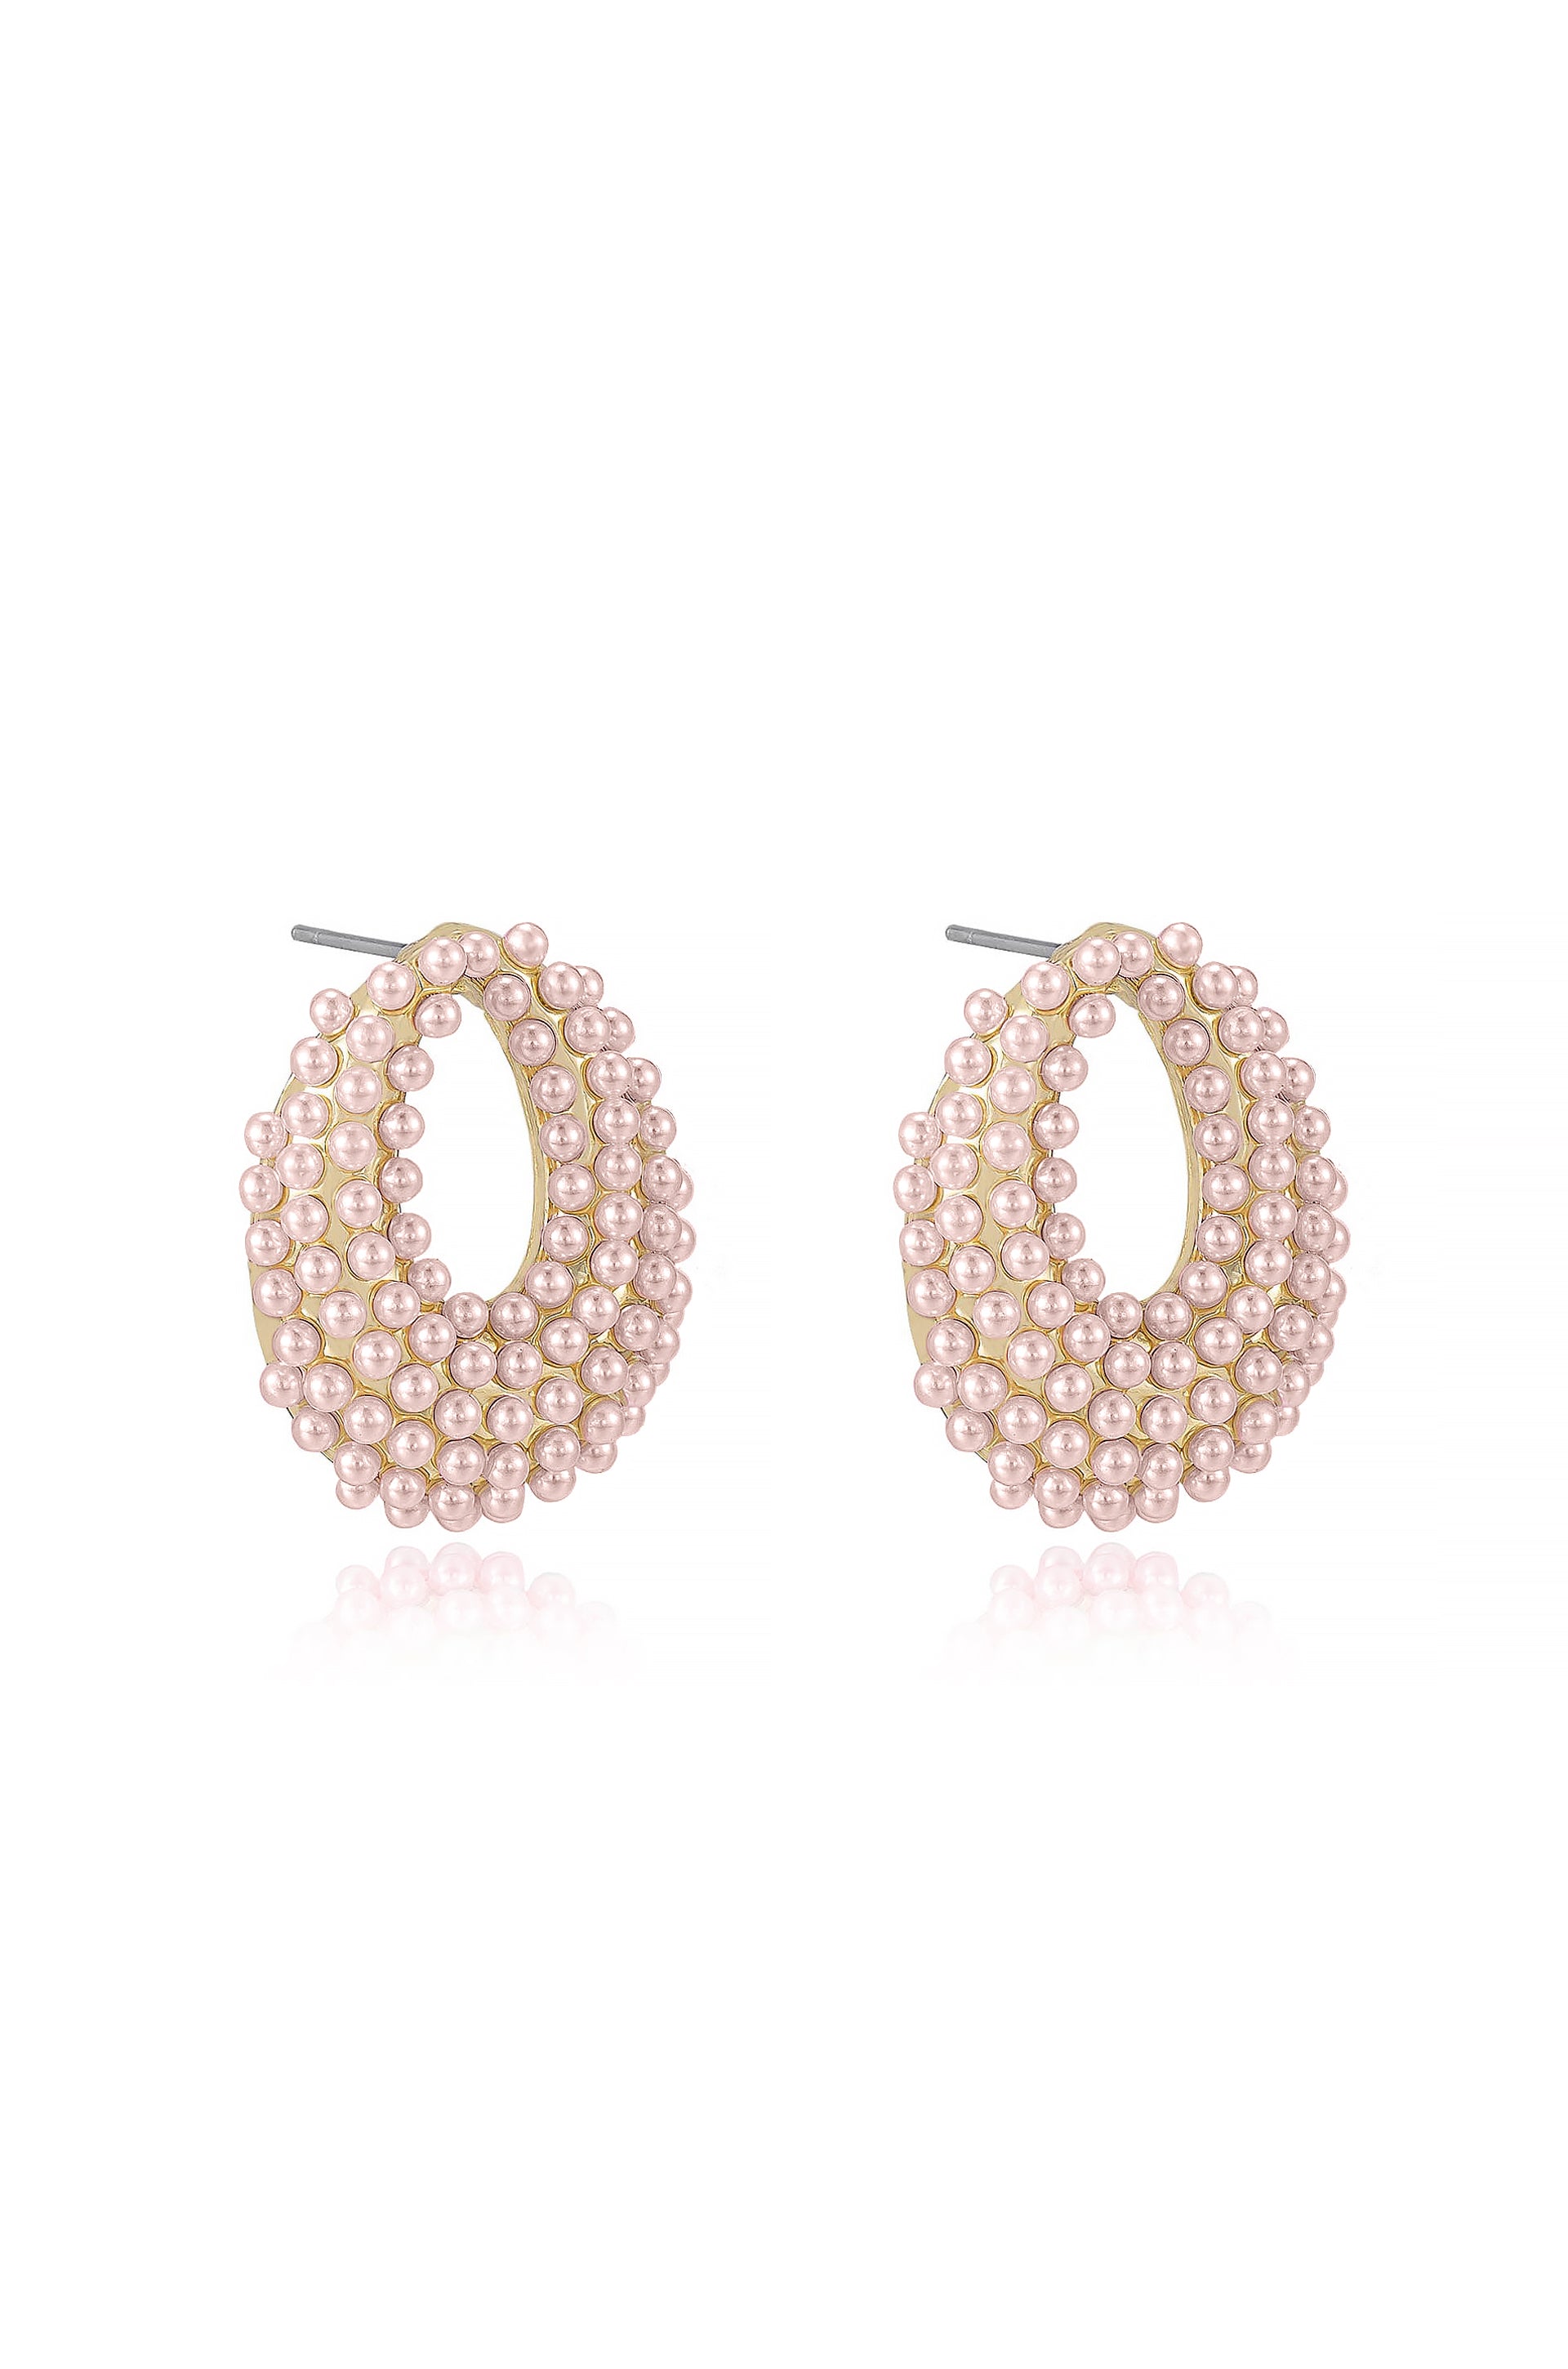 Classic Pearl Cluster Stud Earrings in pink side view